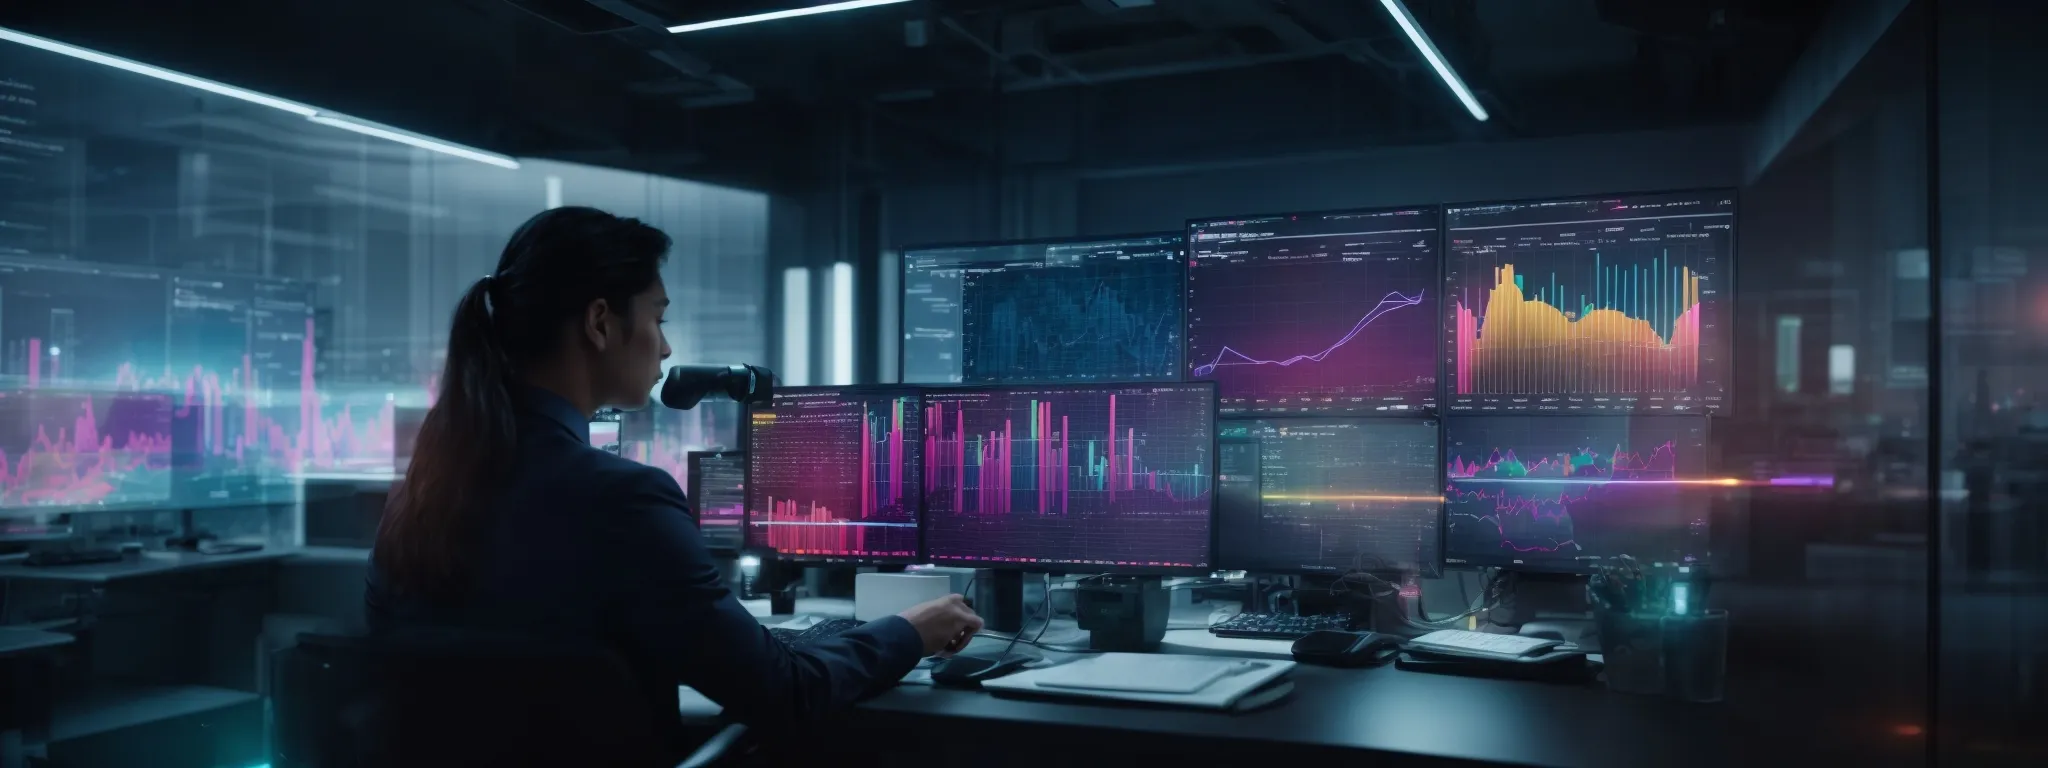 a modern office setting with a digital marketer analyzing complex seo data on a futuristic, holographic interface displaying vibrant graphs and charts.